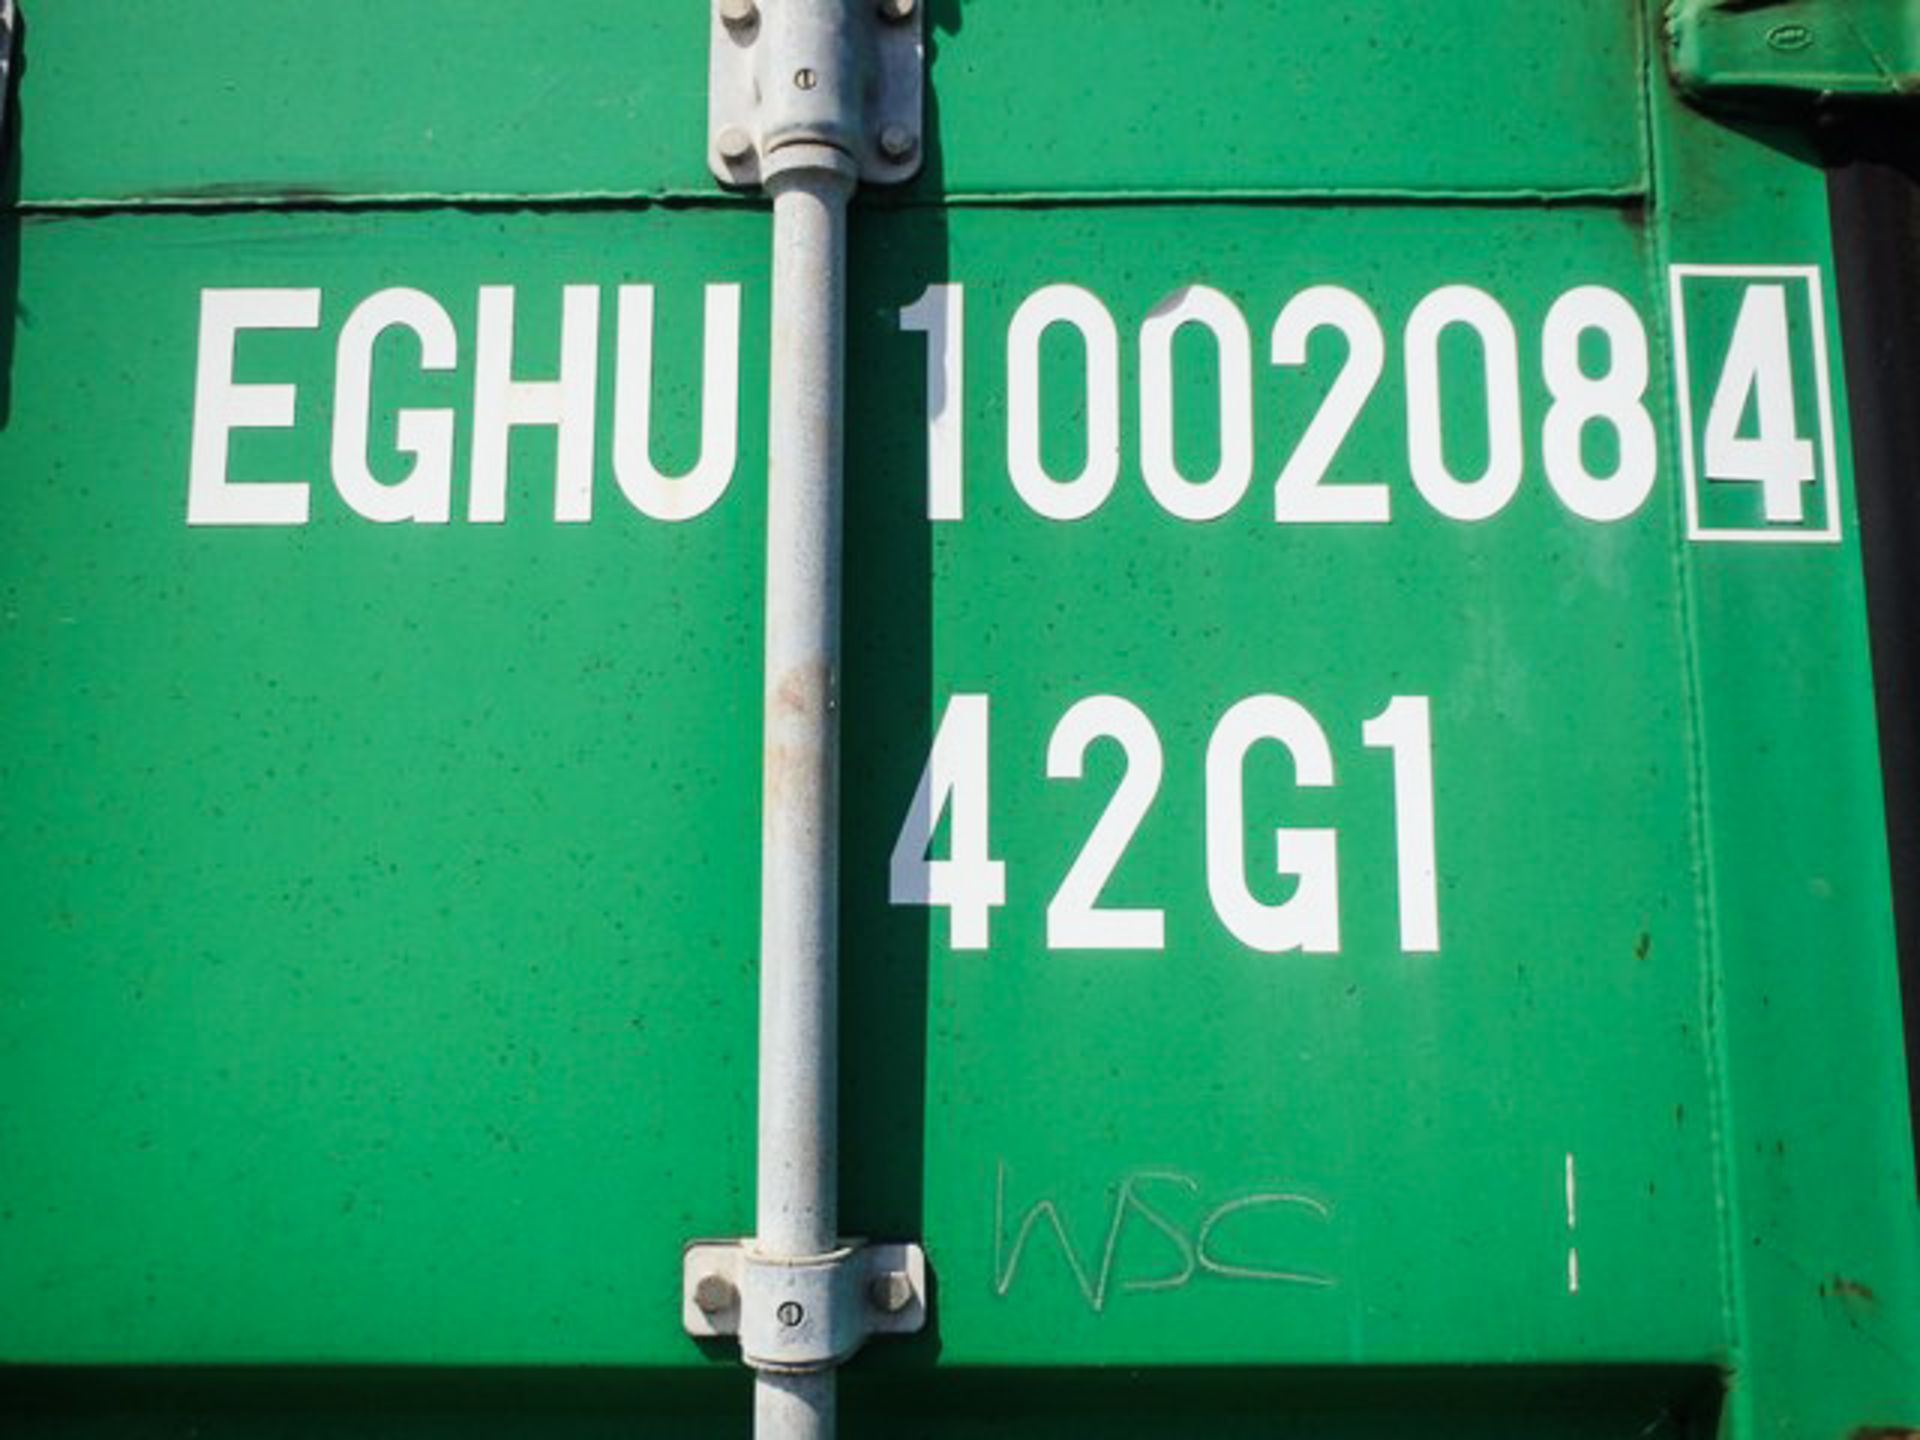 2008 USED 40 X 8 X 8 SHIPPING CONTAINER, S/N EGHU1002084 - Image 4 of 7